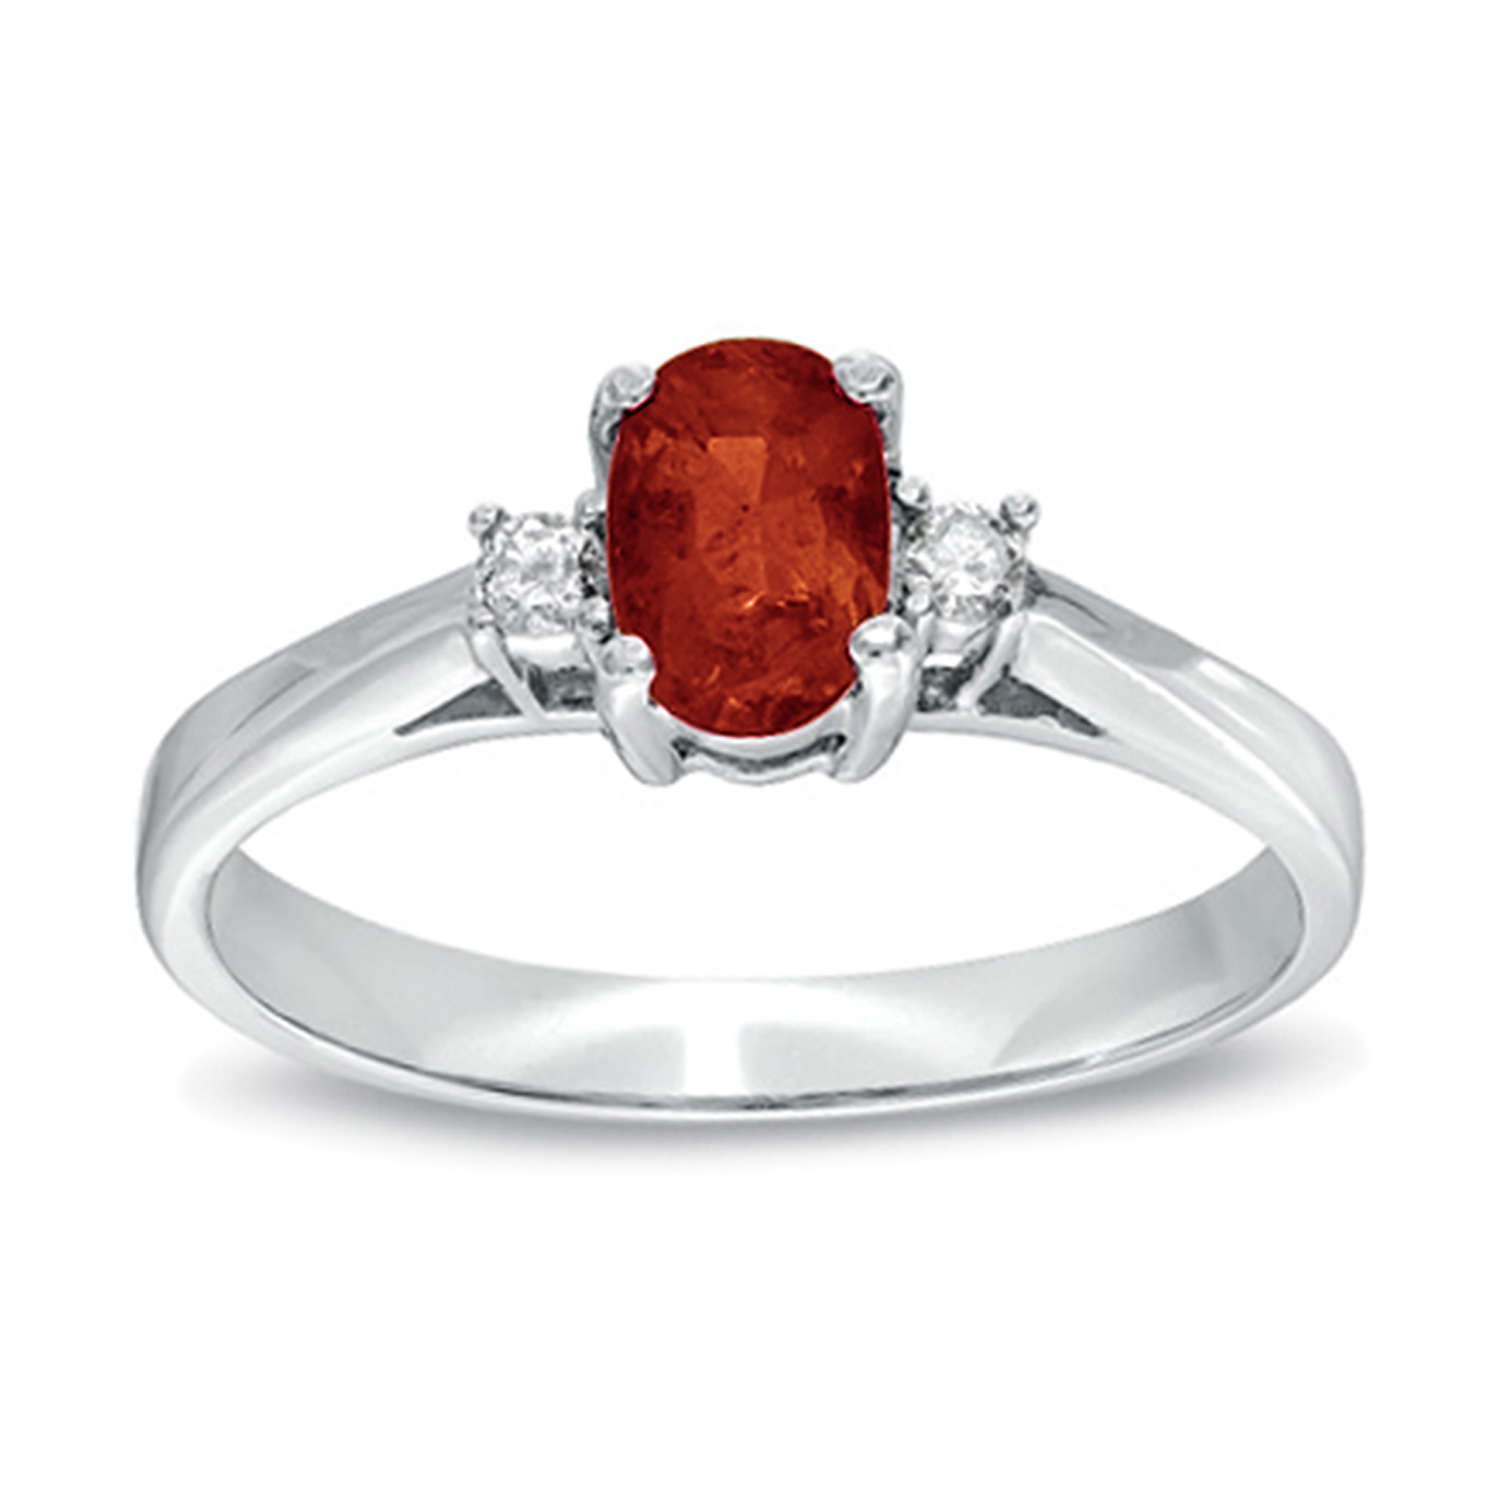 0.55cttw Natural Heated Ruby and Diamond Ring set in 14k Gold